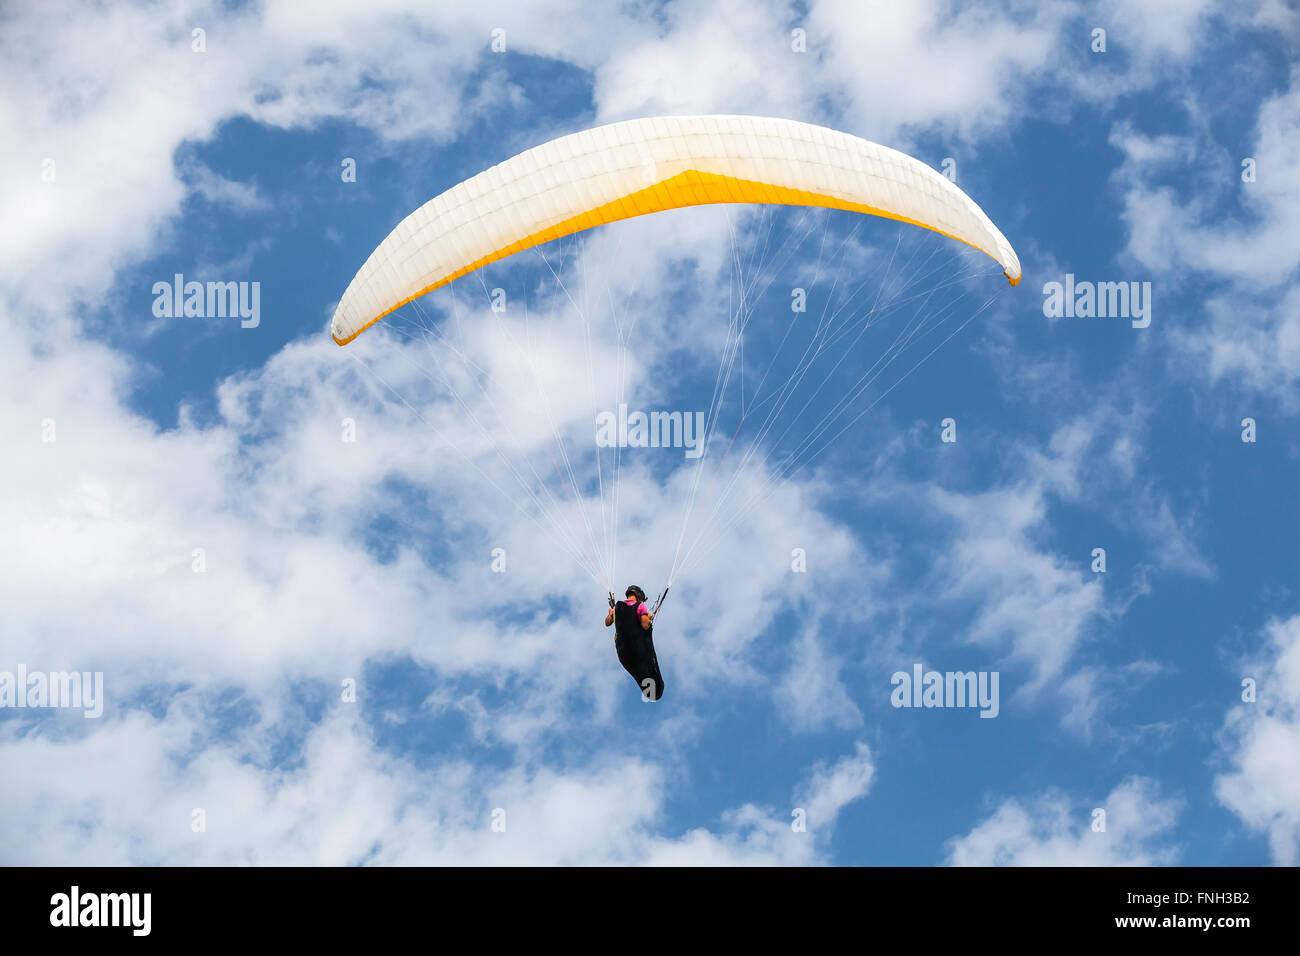 Amateur paraglider in blue sky with clouds Stock Photo